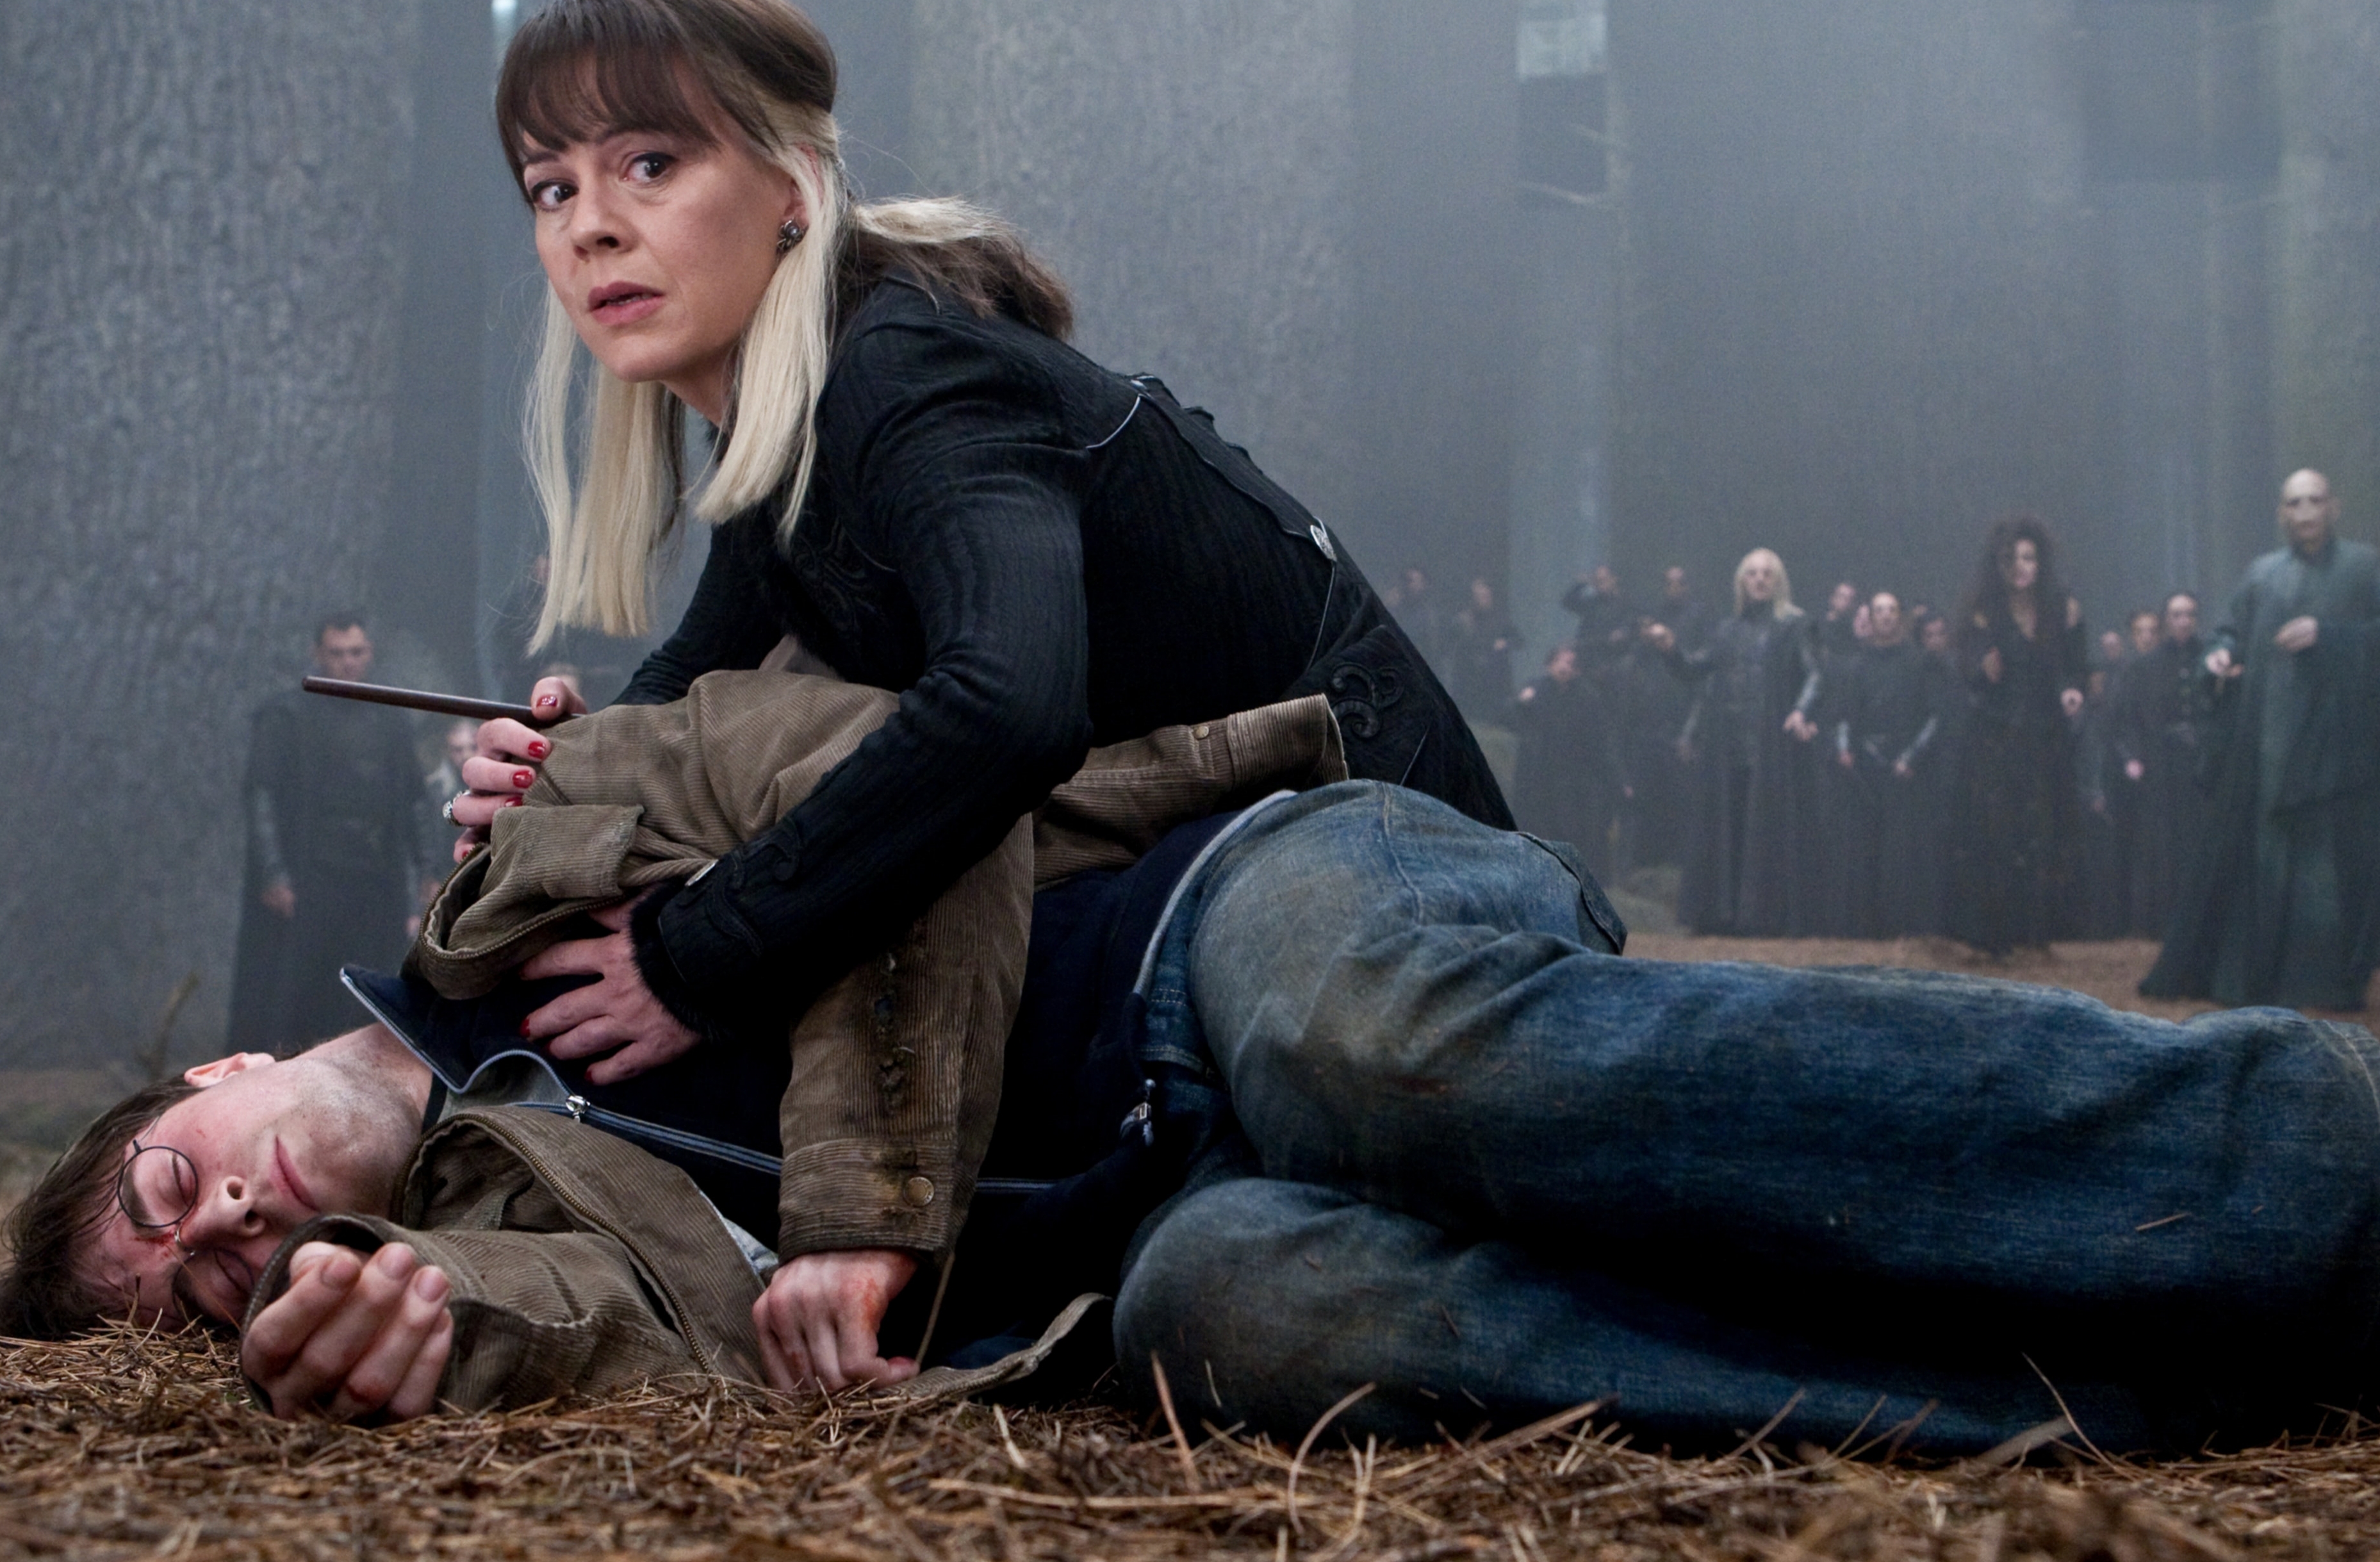 Narcissa Malfoy: A Mother's Love in the Midst of Darkness